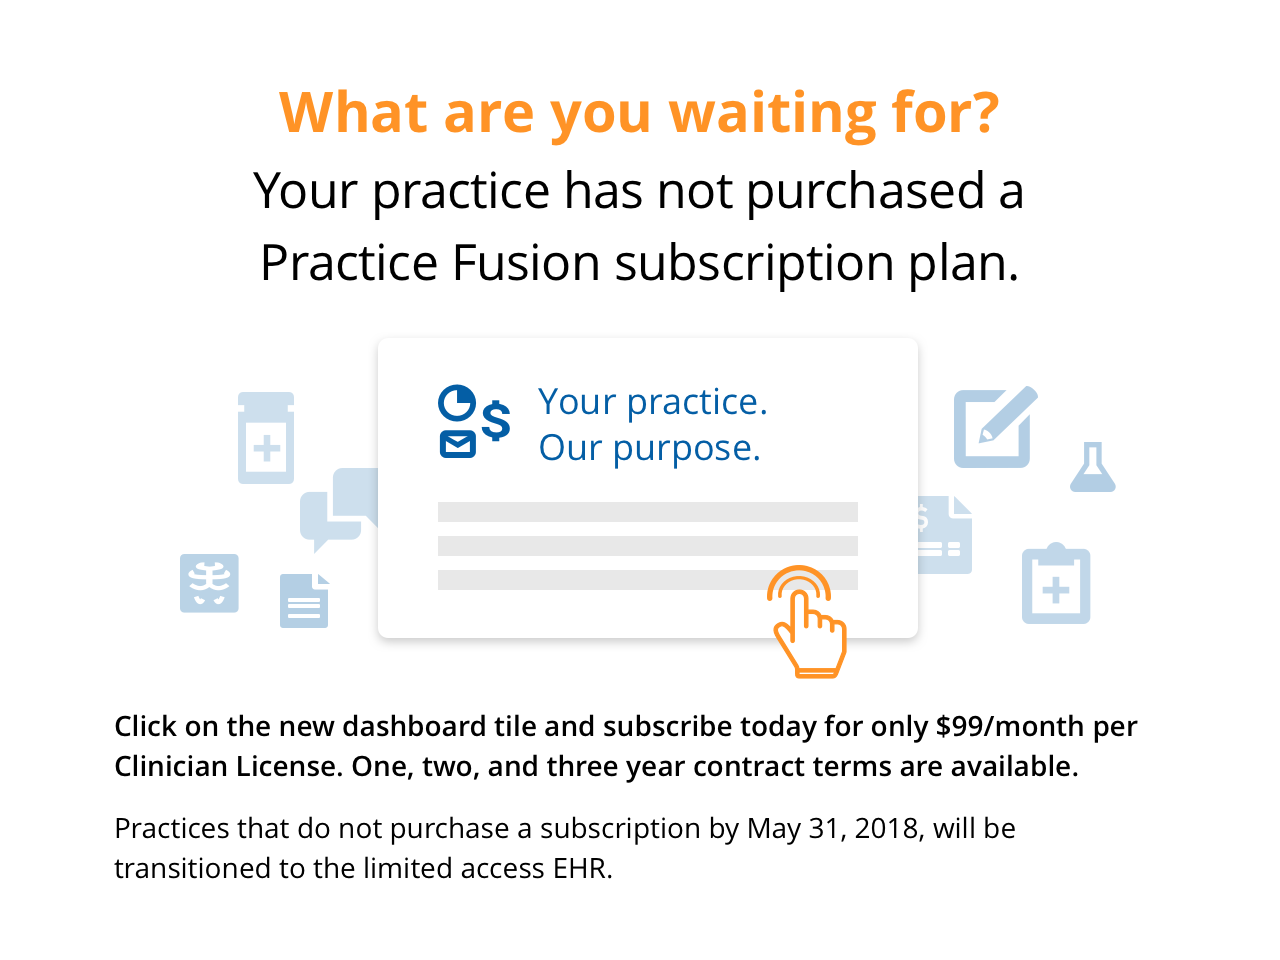 Click on the new dashboard tile and subscribe today for only $99/month per Clinician License. One, two, and three year contract terms are available.